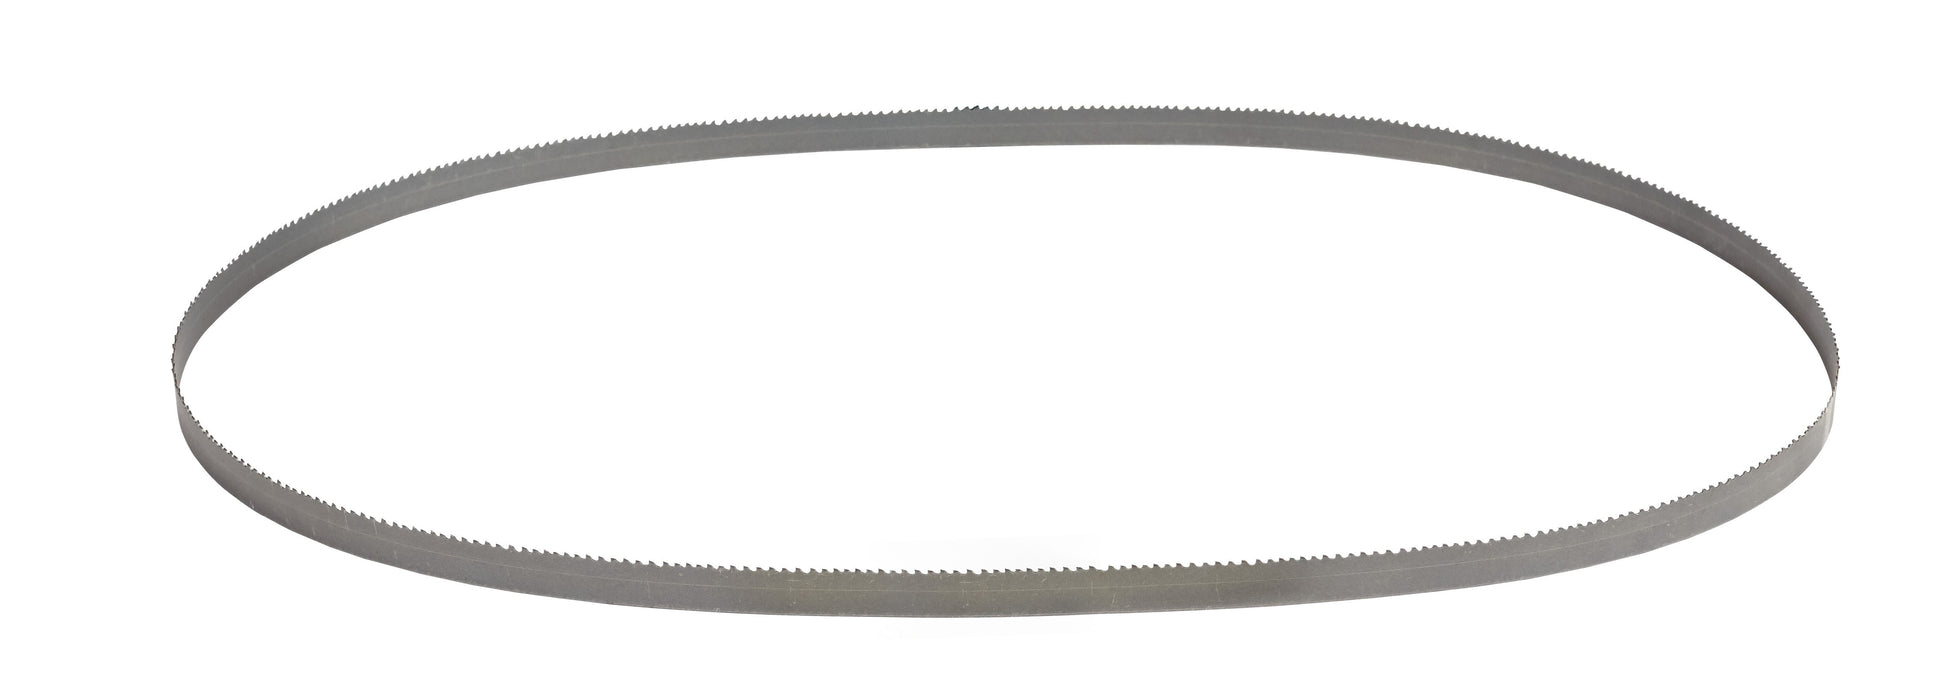 Milwaukee 48-39-0516 14 TPI Compact Band Saw Blades 25-Pack